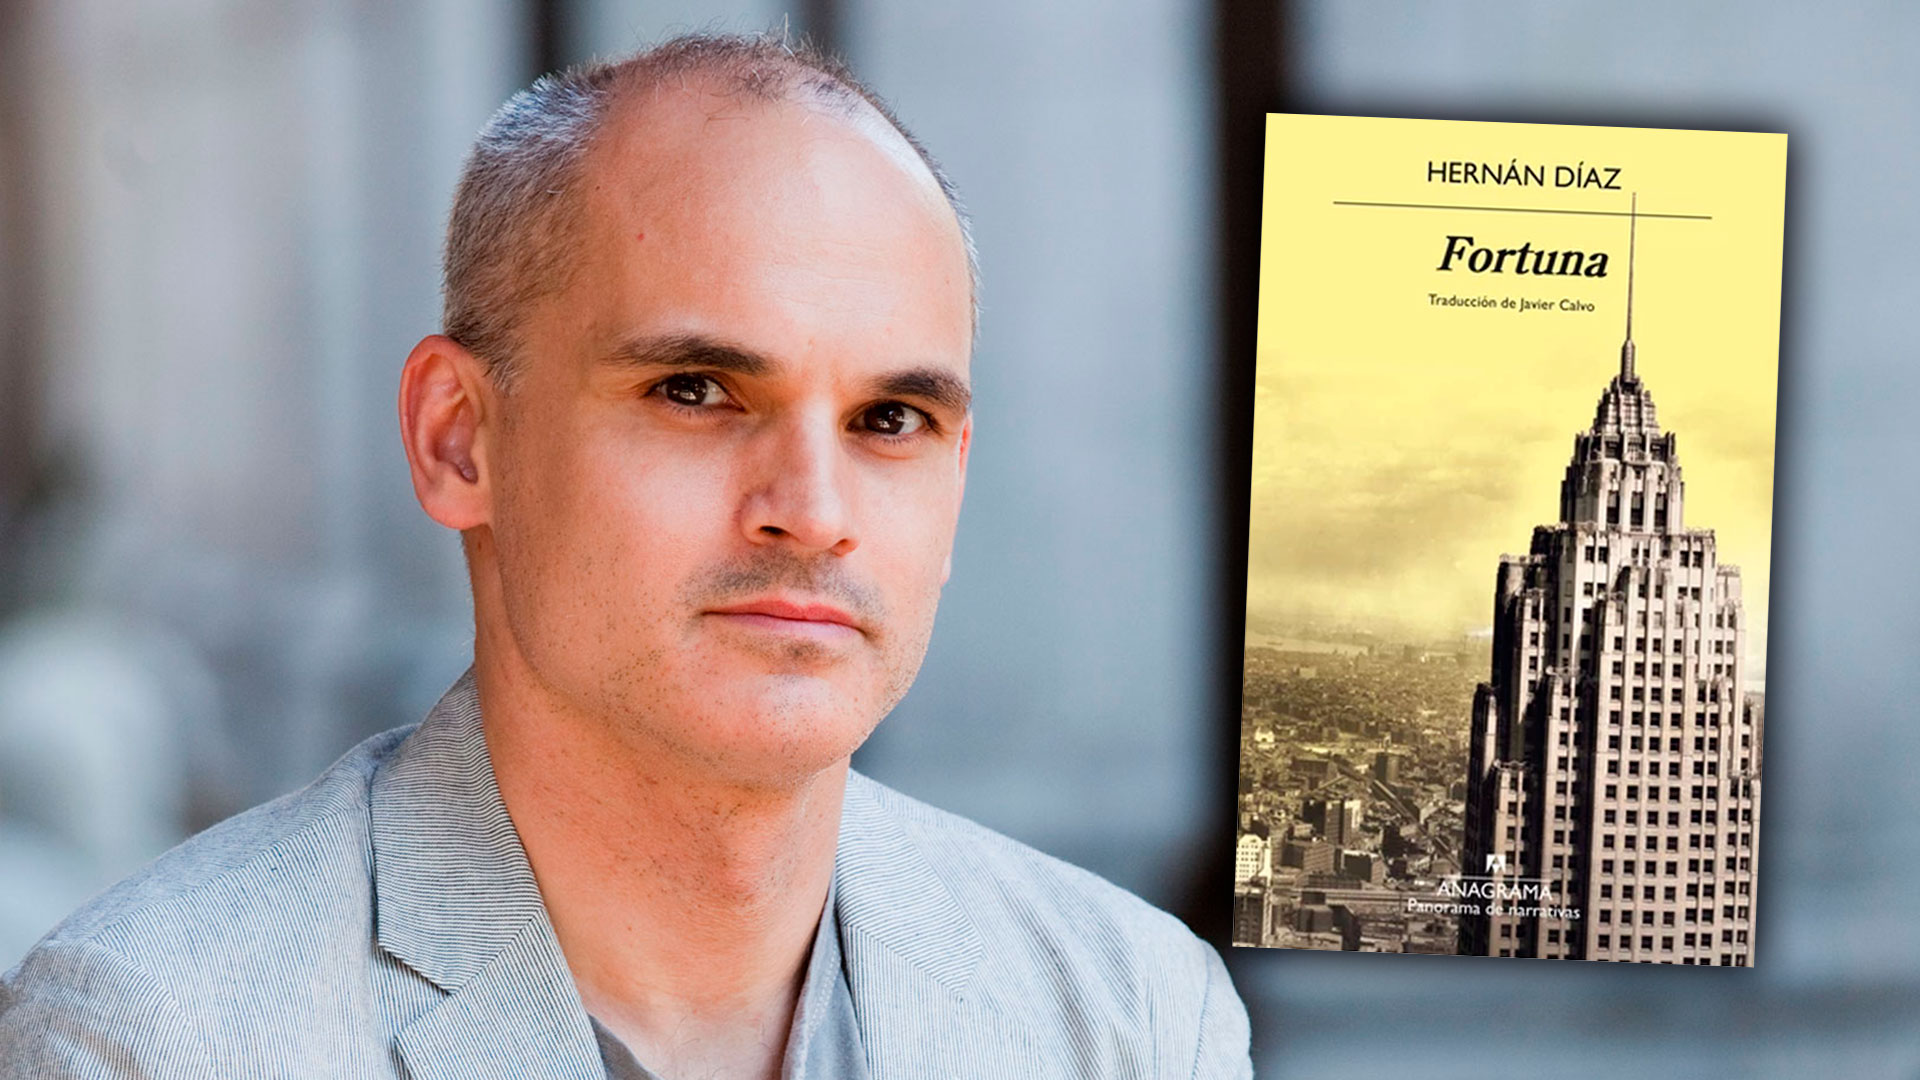 Hernán Díaz's novel had been chosen by media such as The New York Times and The Washington Post as one of the 2022 novels.